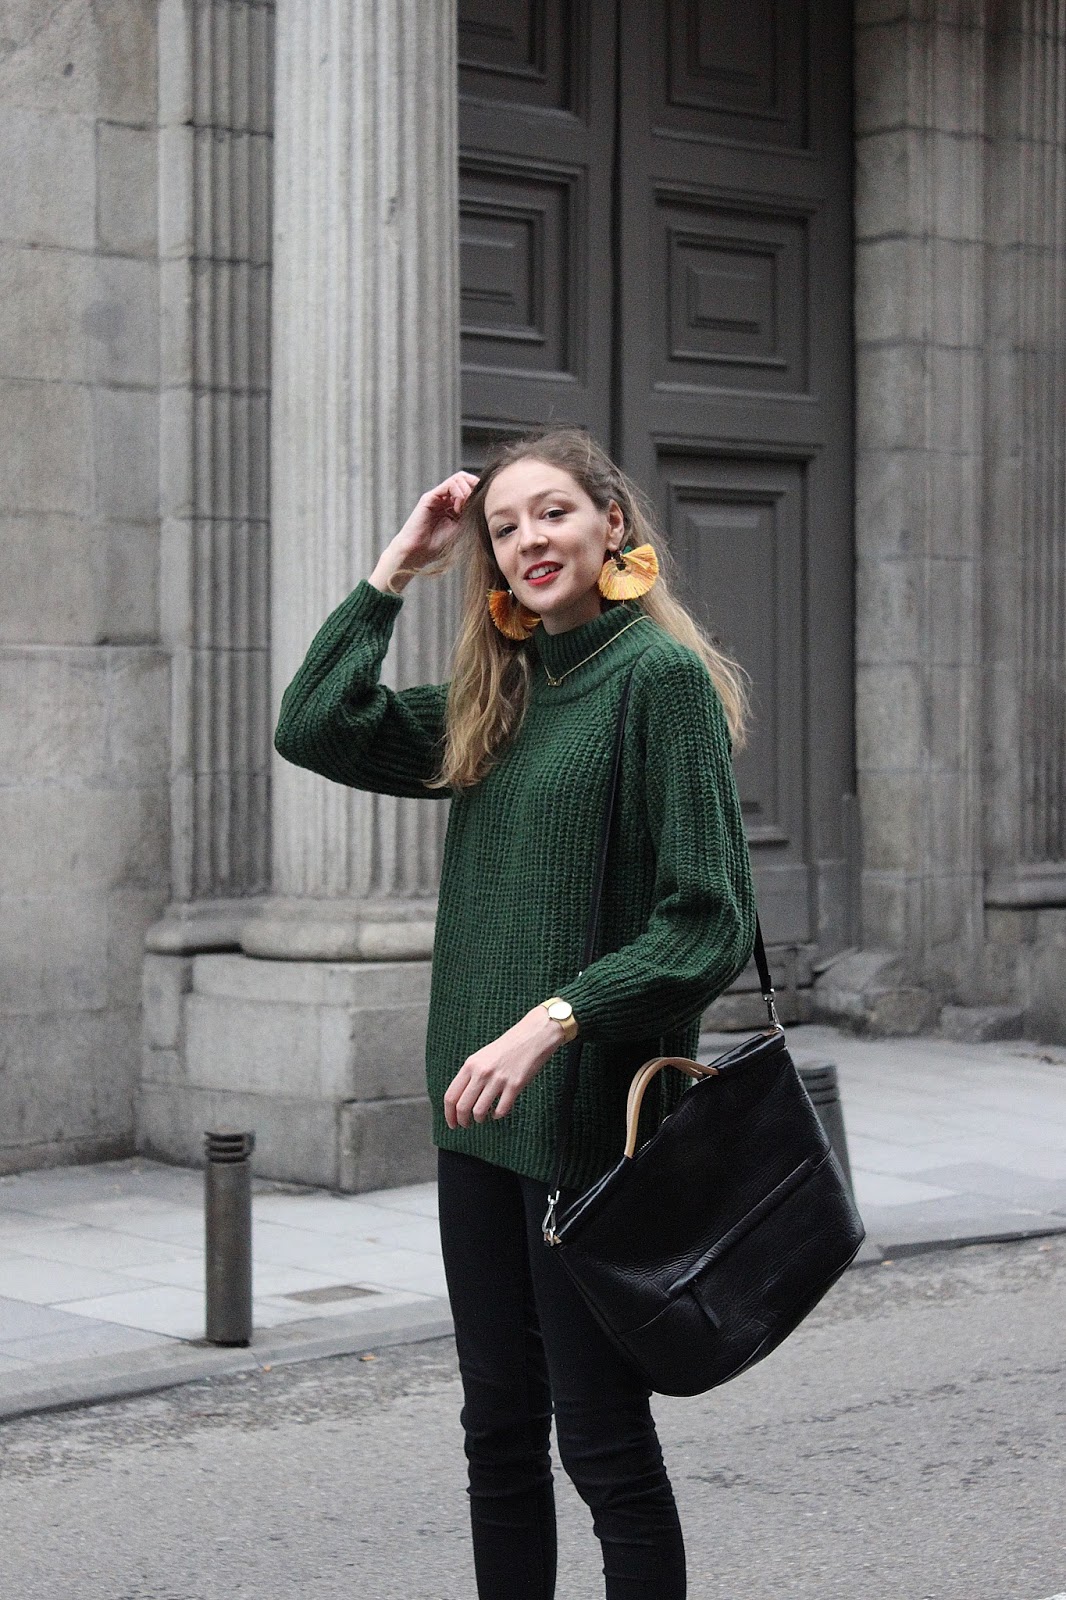 militar-boots-green-turtle-neck-doctor-maxibag-street-style-zaful